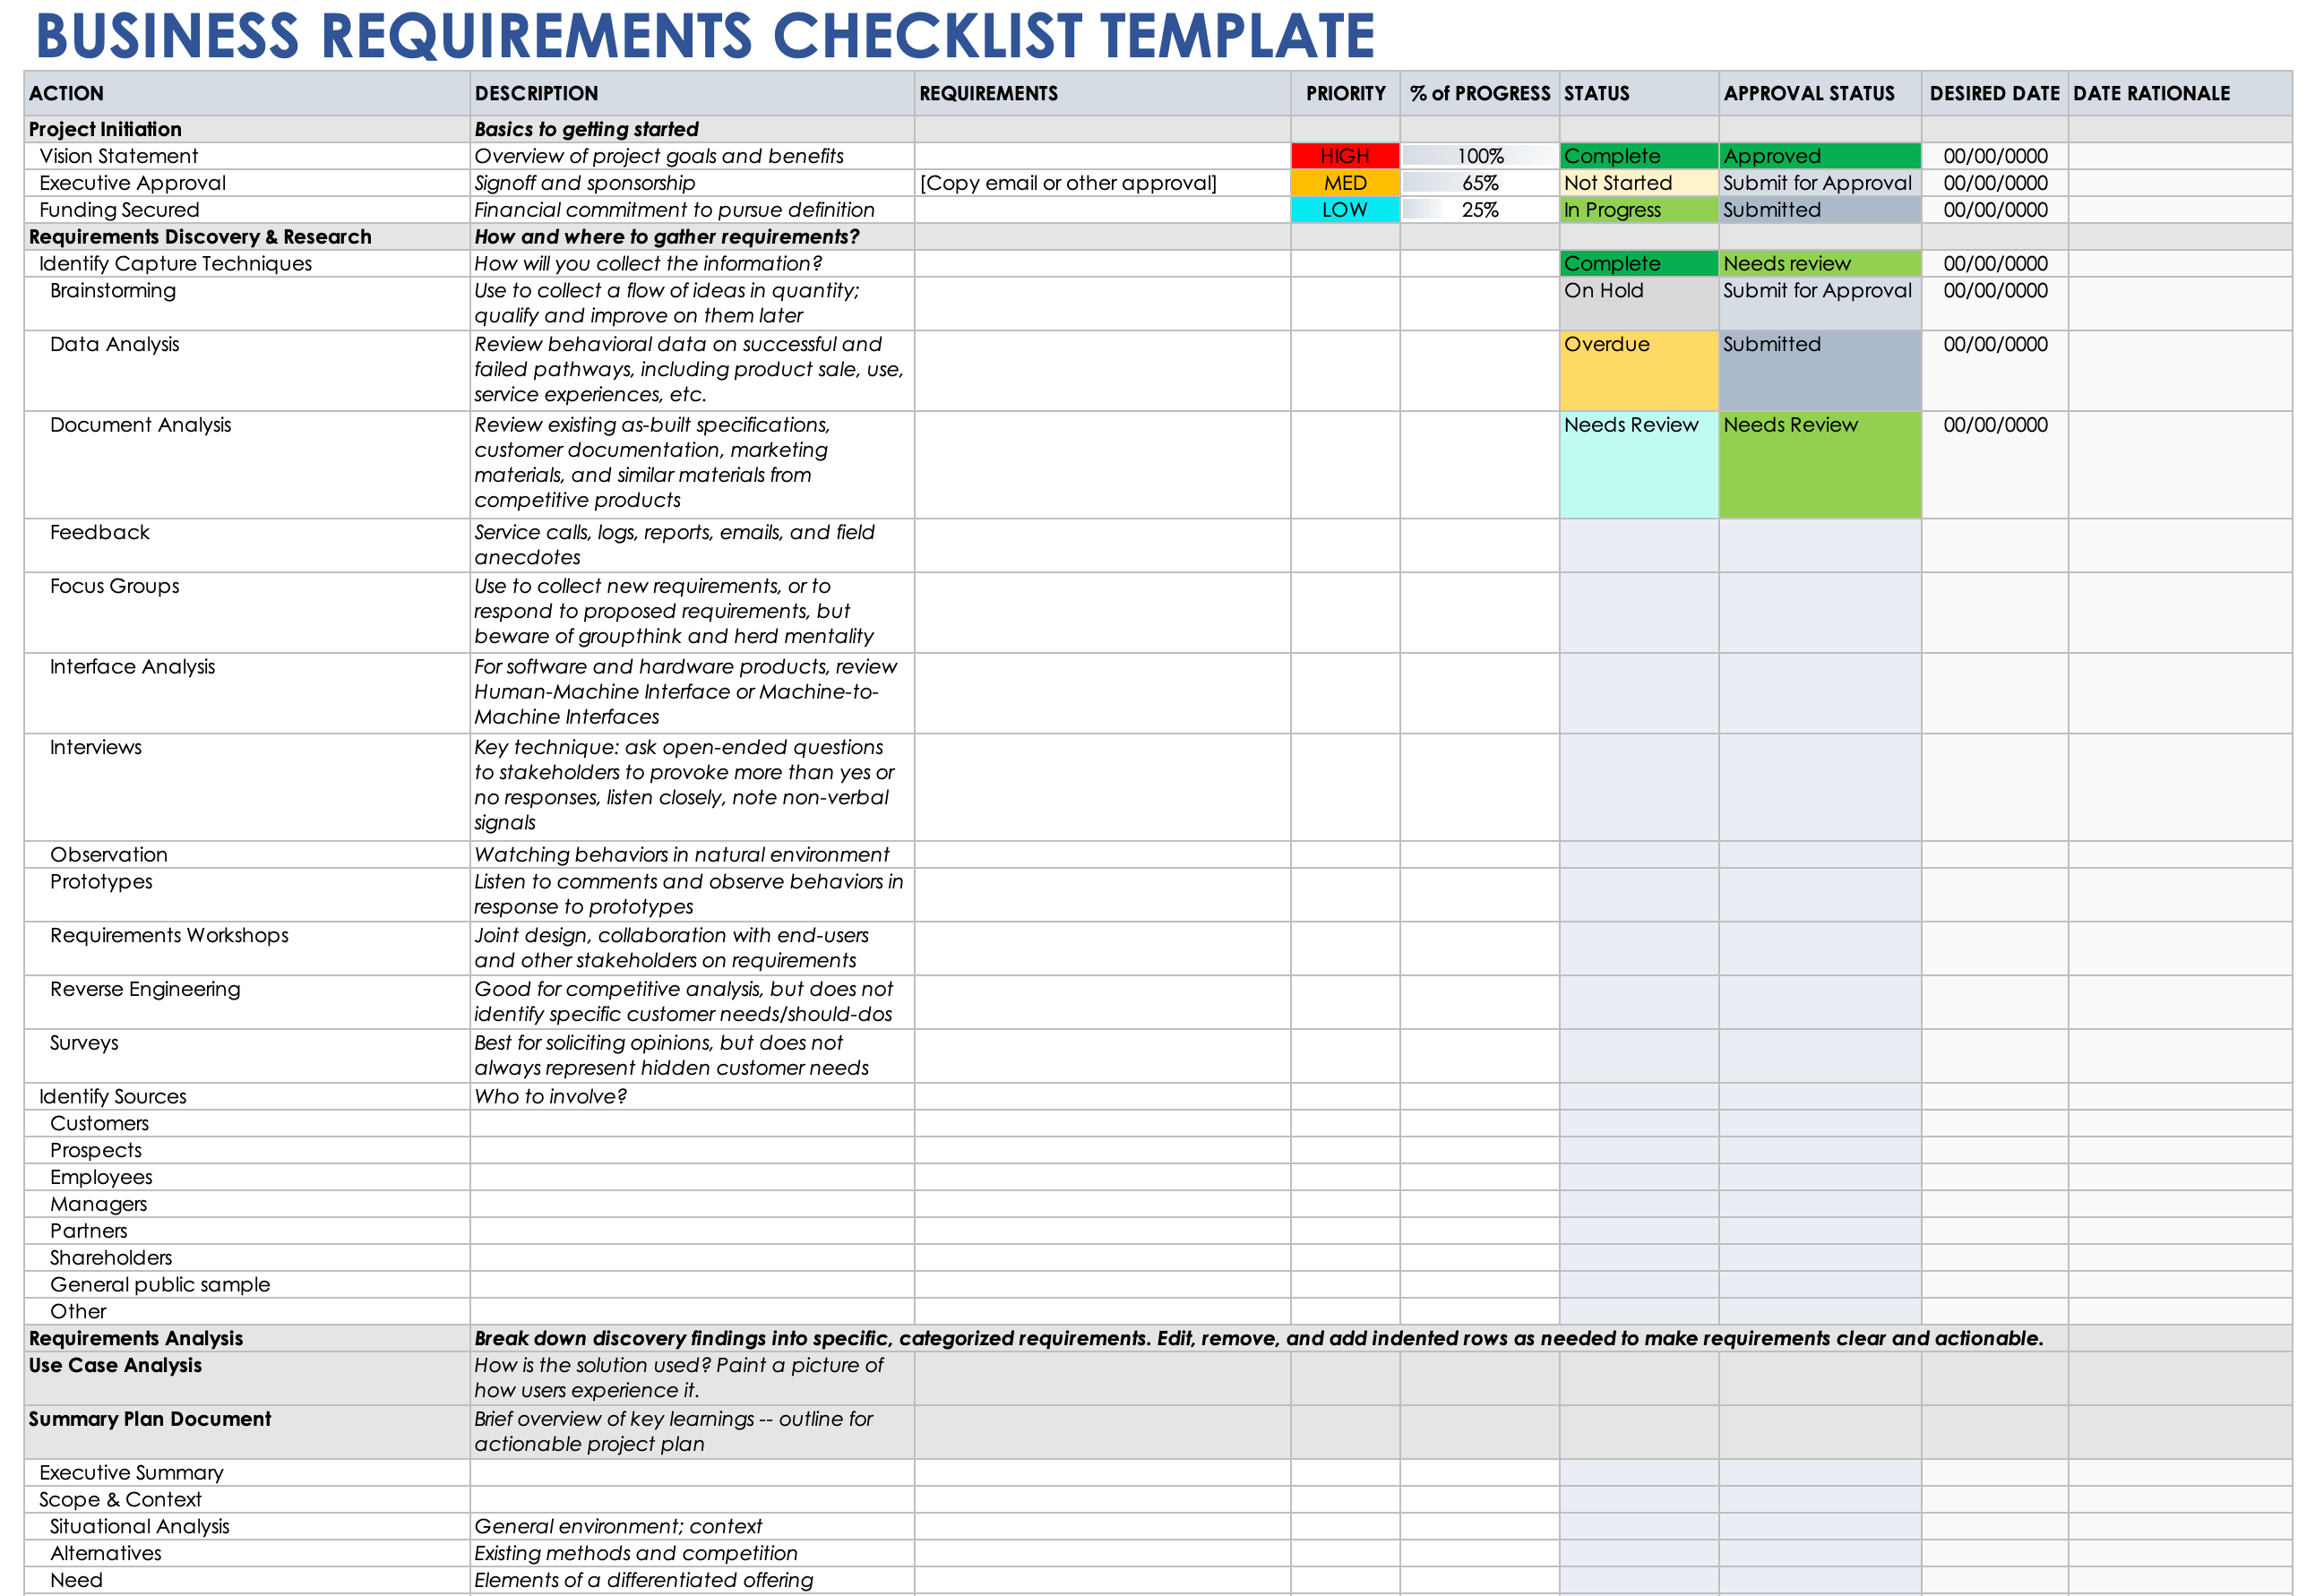 Business Requirements Checklist Template